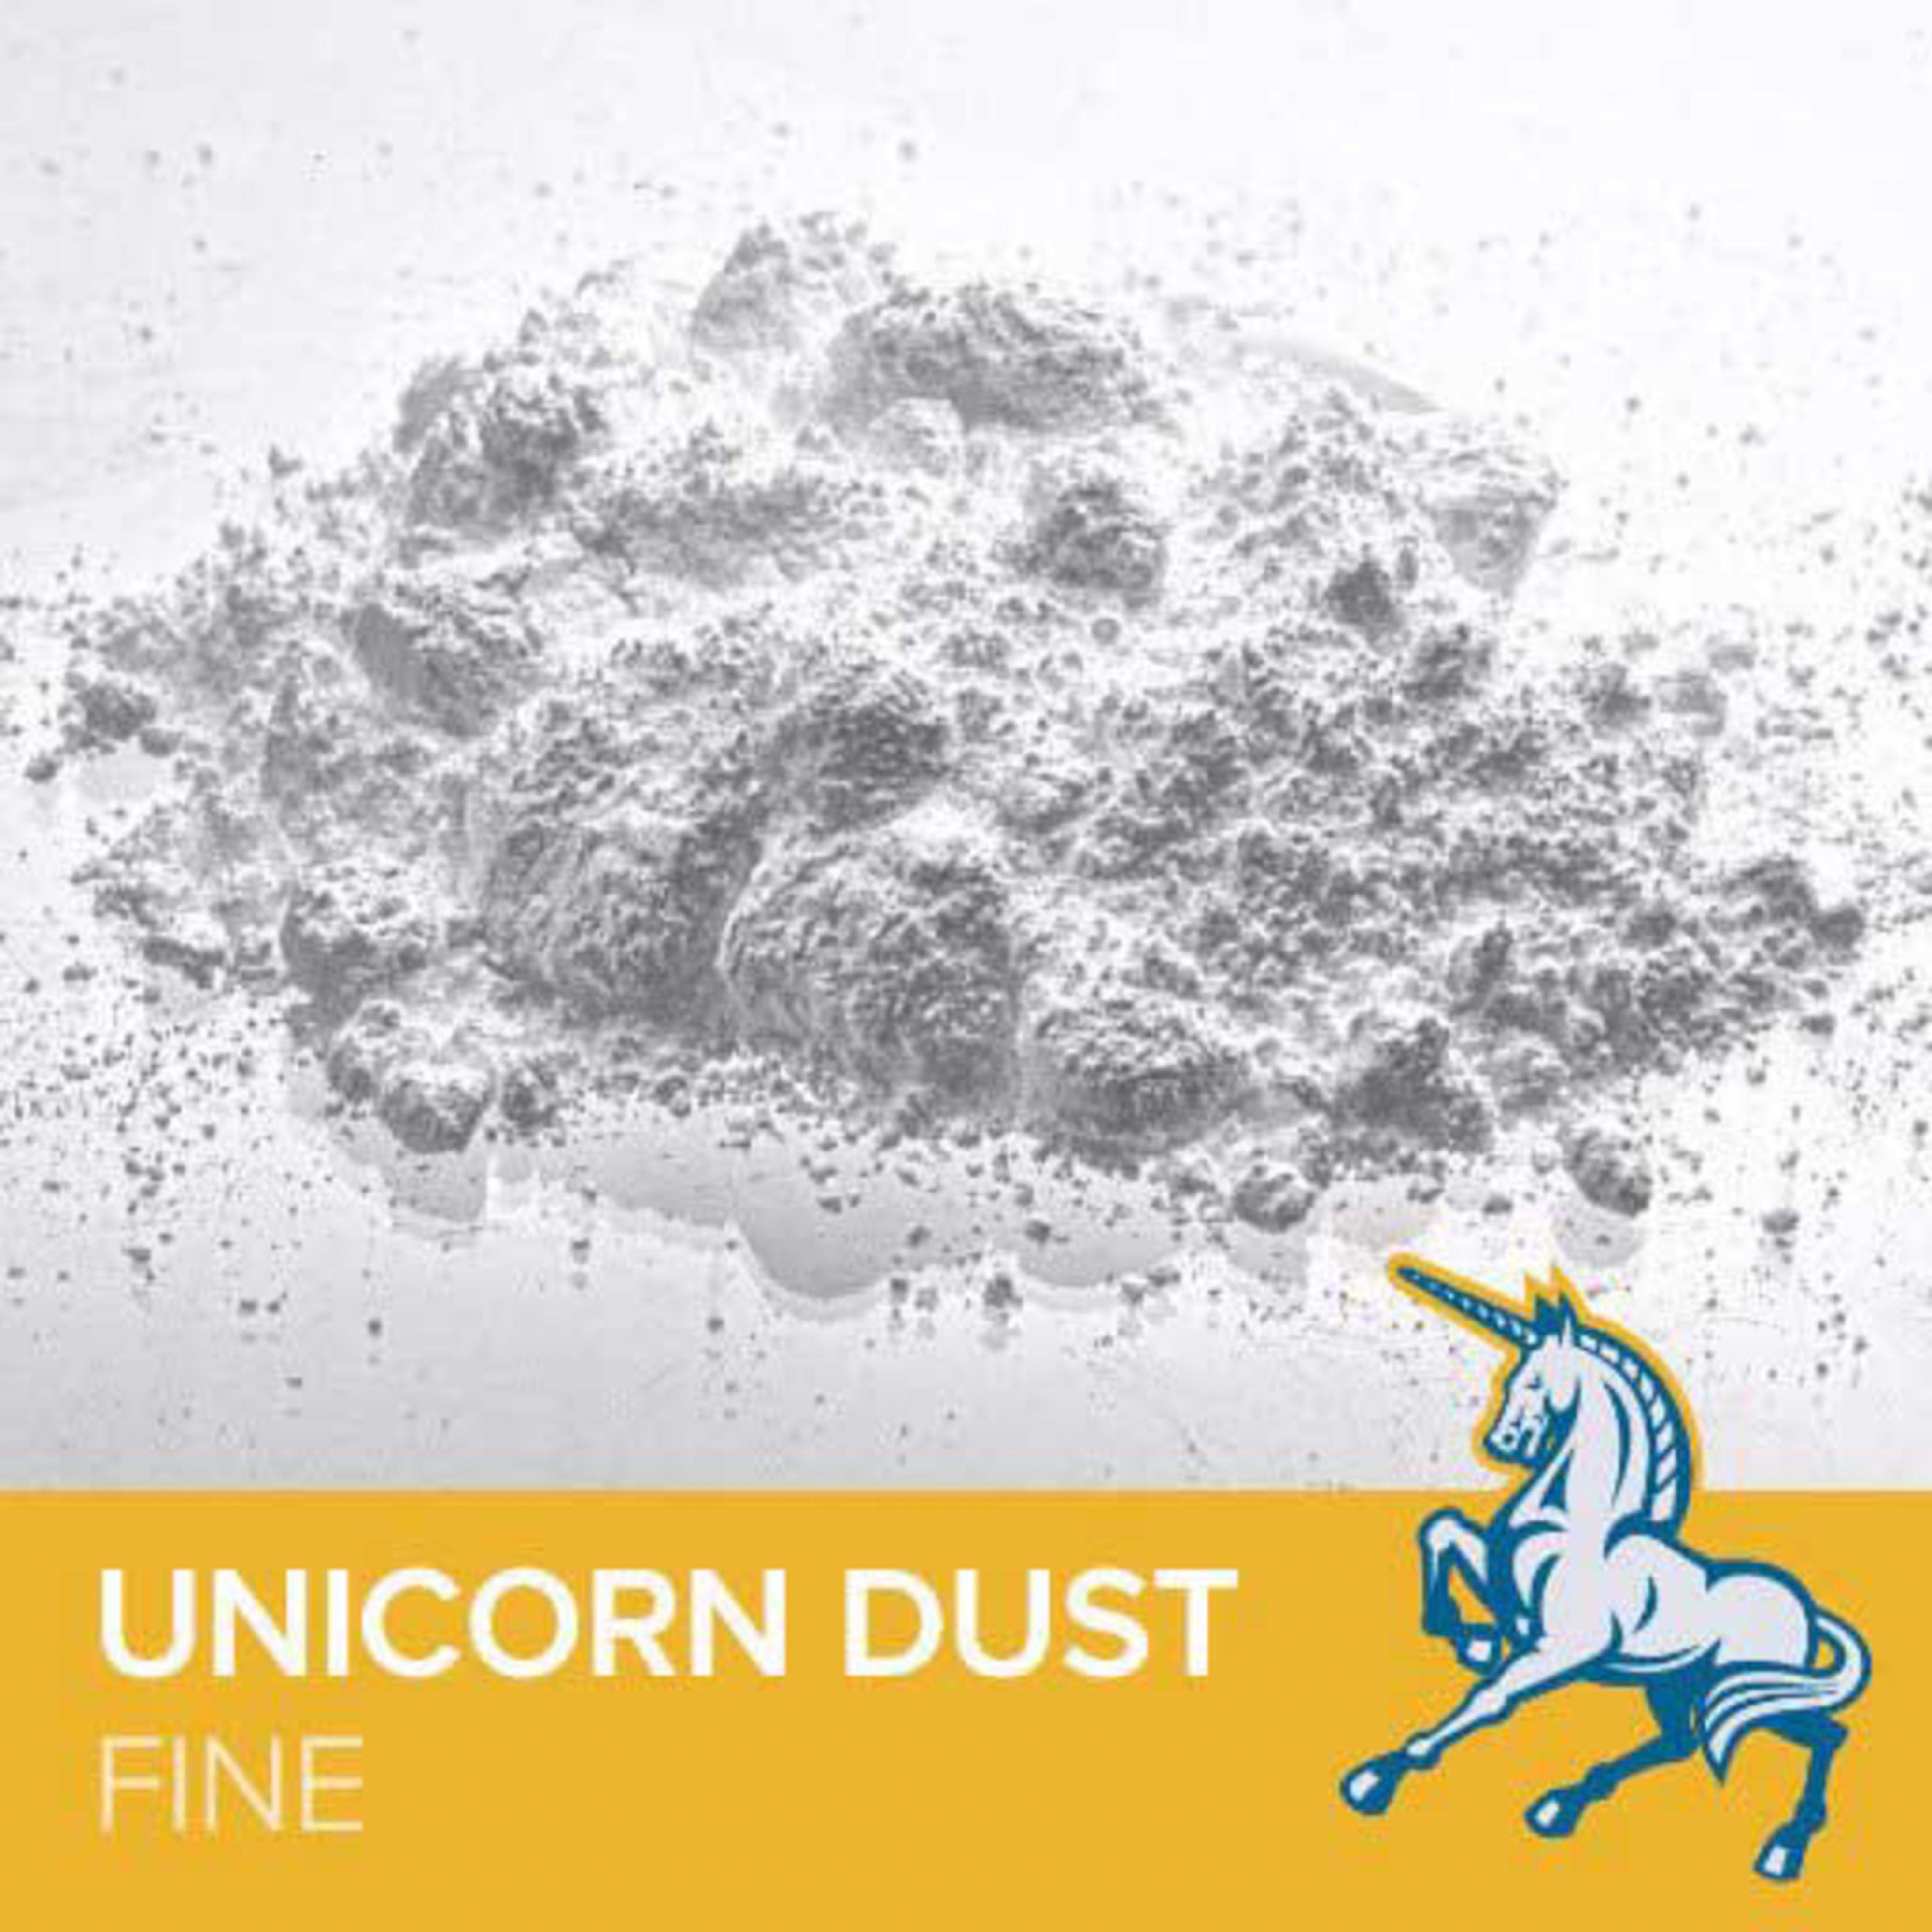 FrictionLabs Unicorn Dust (10oz) Review